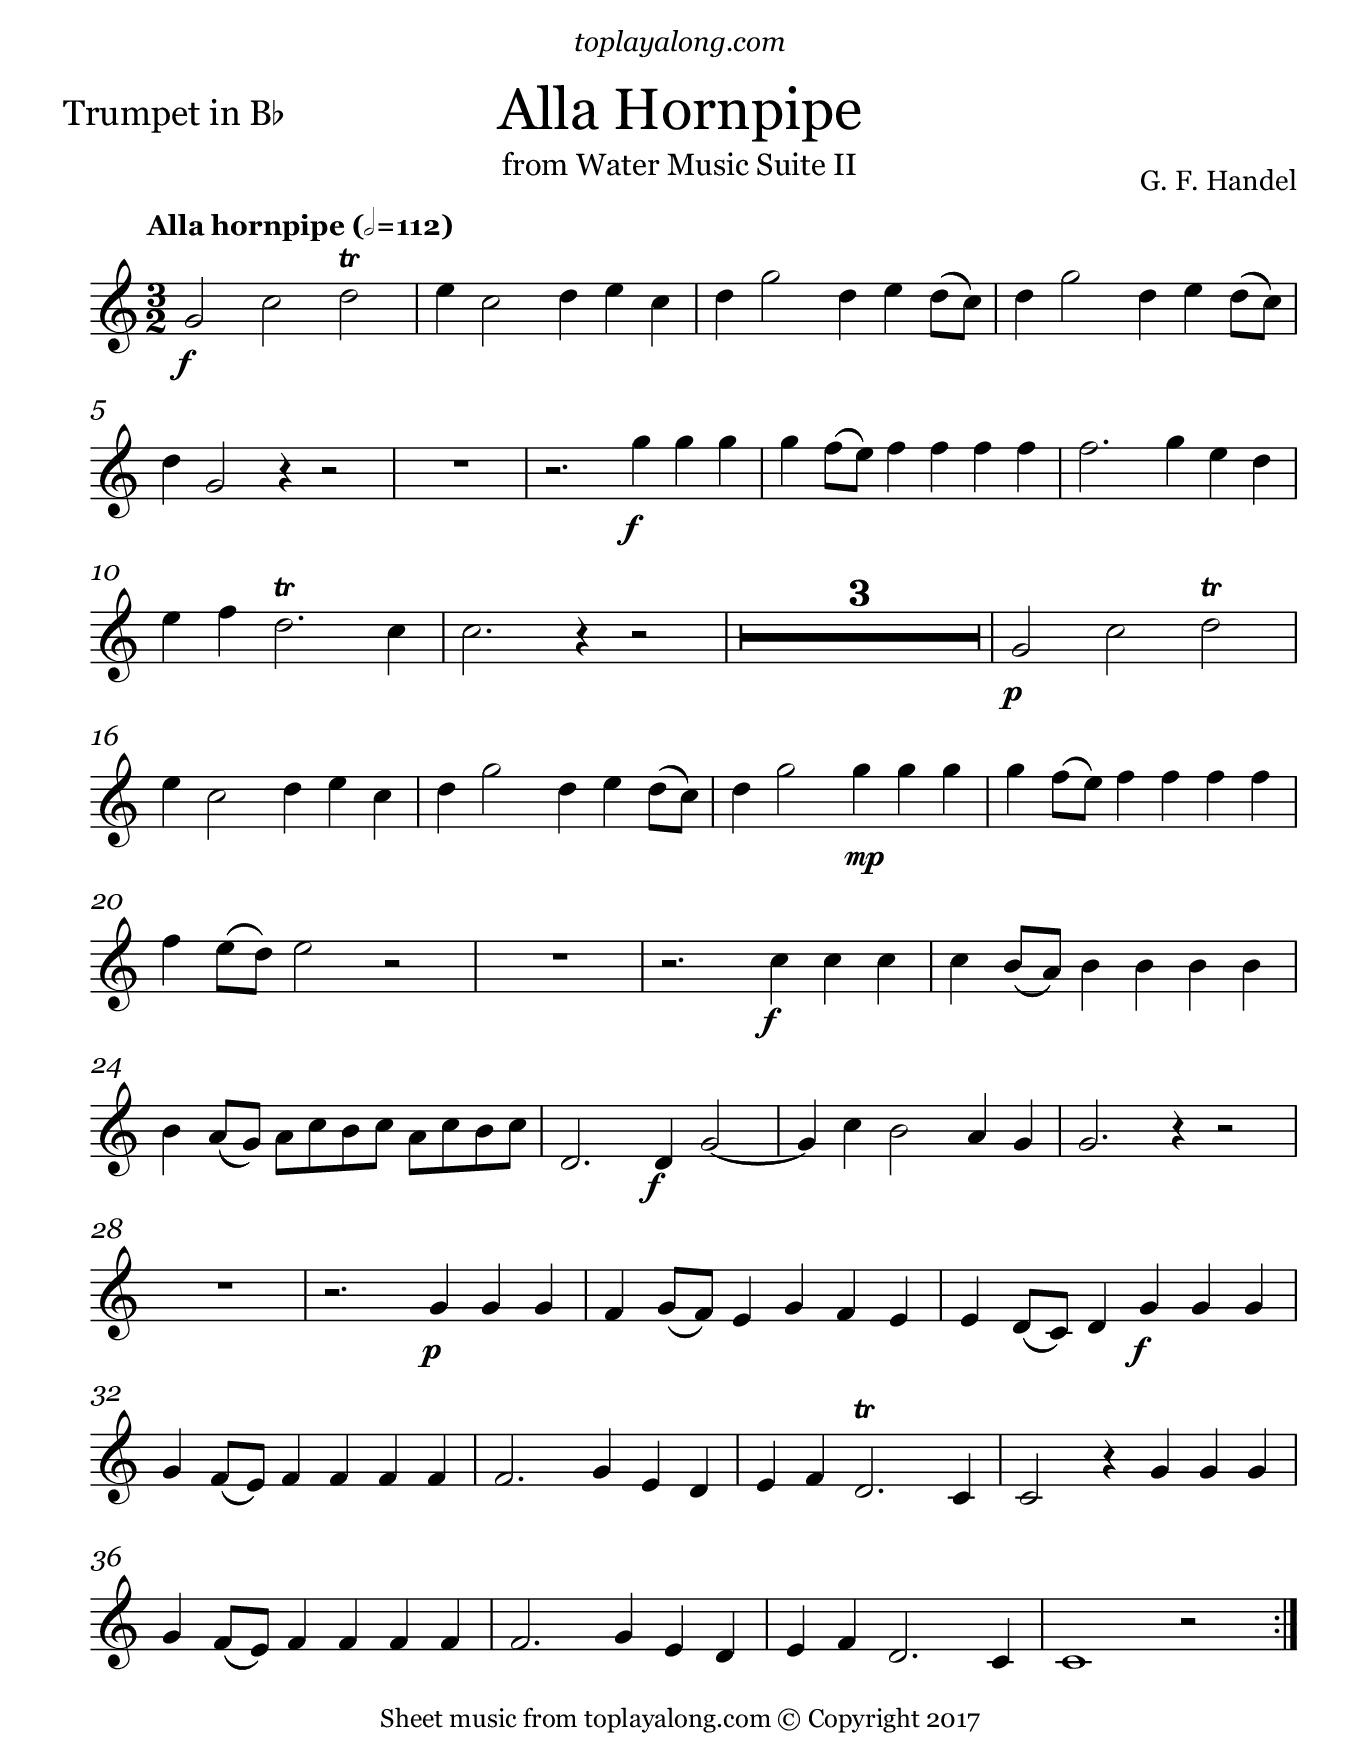 Free Trumpet Sheet Music For Alla Hornpipe From Water Music Suite Ii - Free Printable Sheet Music For Trumpet